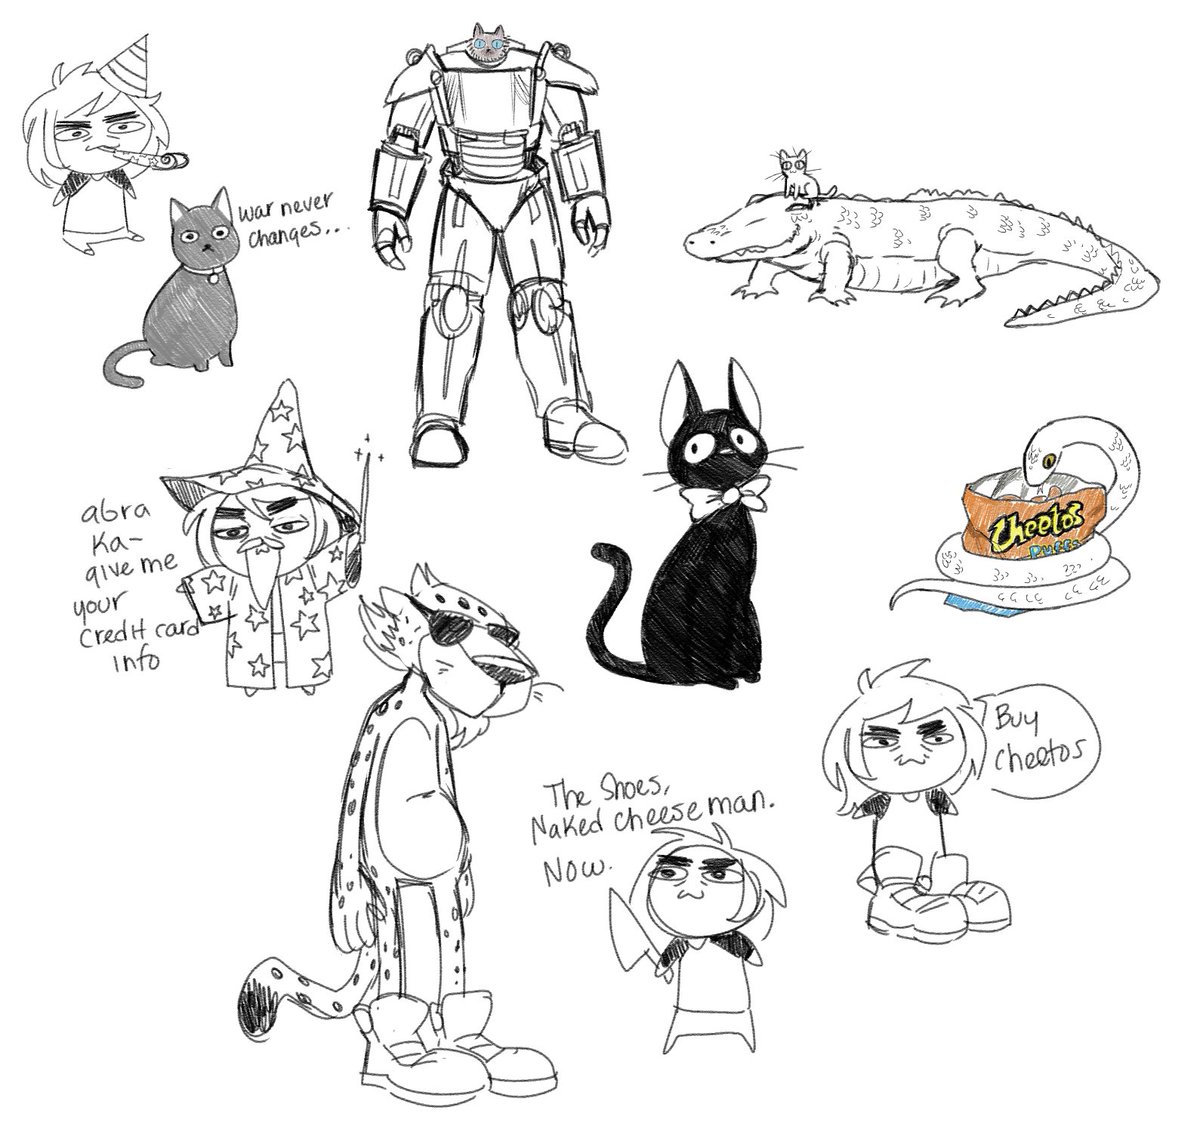 i forgot to post the extra doodles from the stream today whoops 